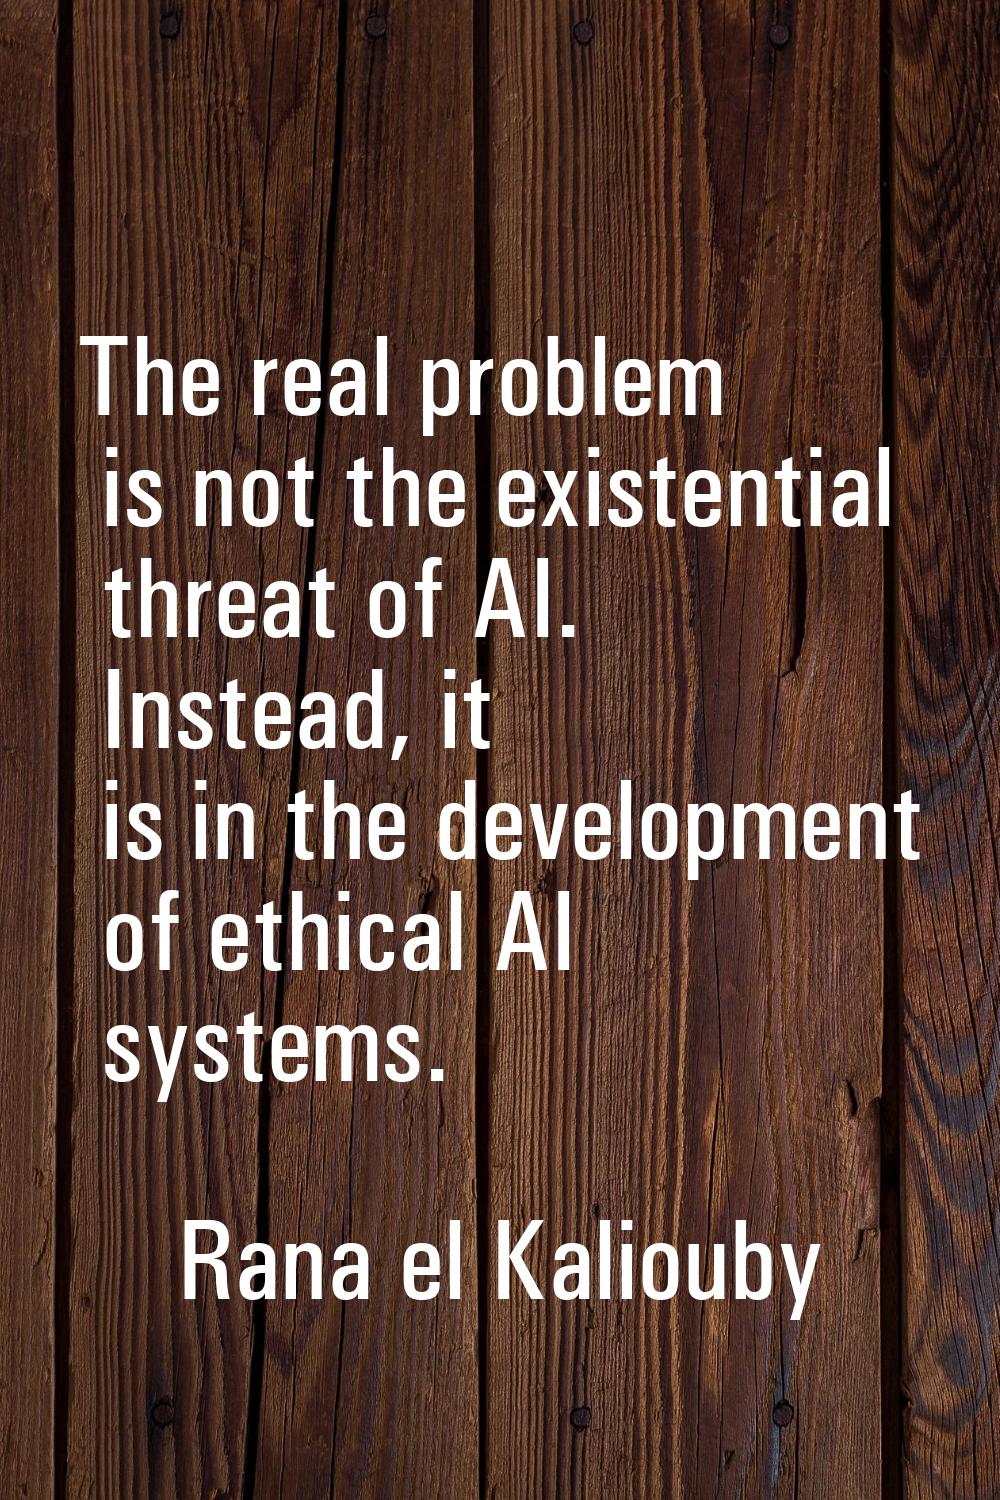 The real problem is not the existential threat of AI. Instead, it is in the development of ethical 